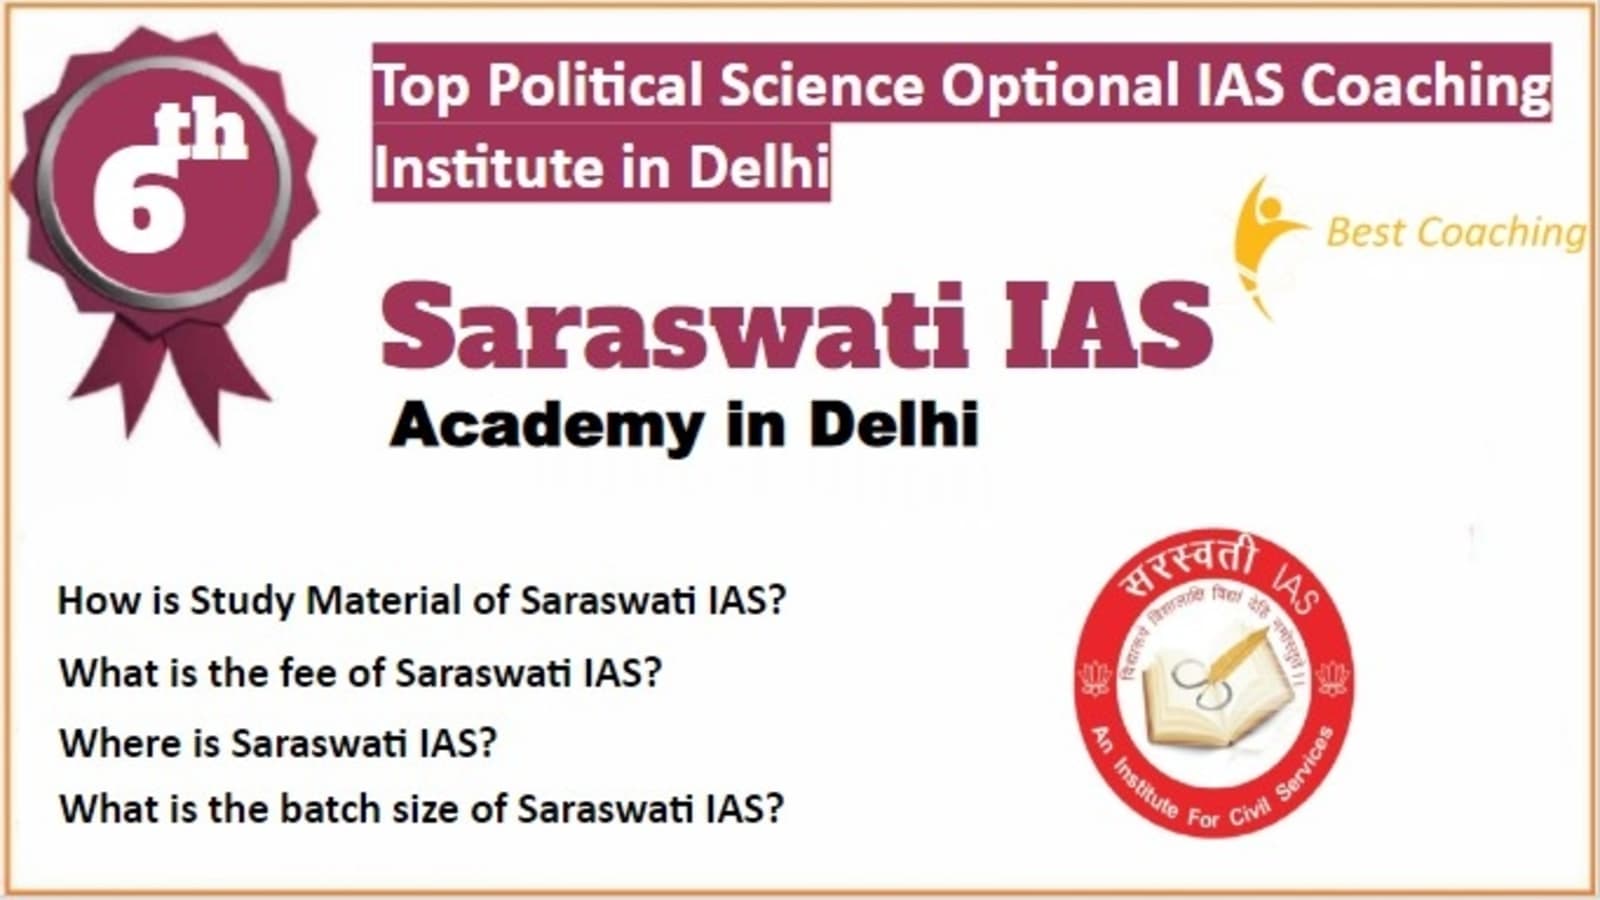 Rank 6 Best Political Science and International Relations Optional IAS Coaching 